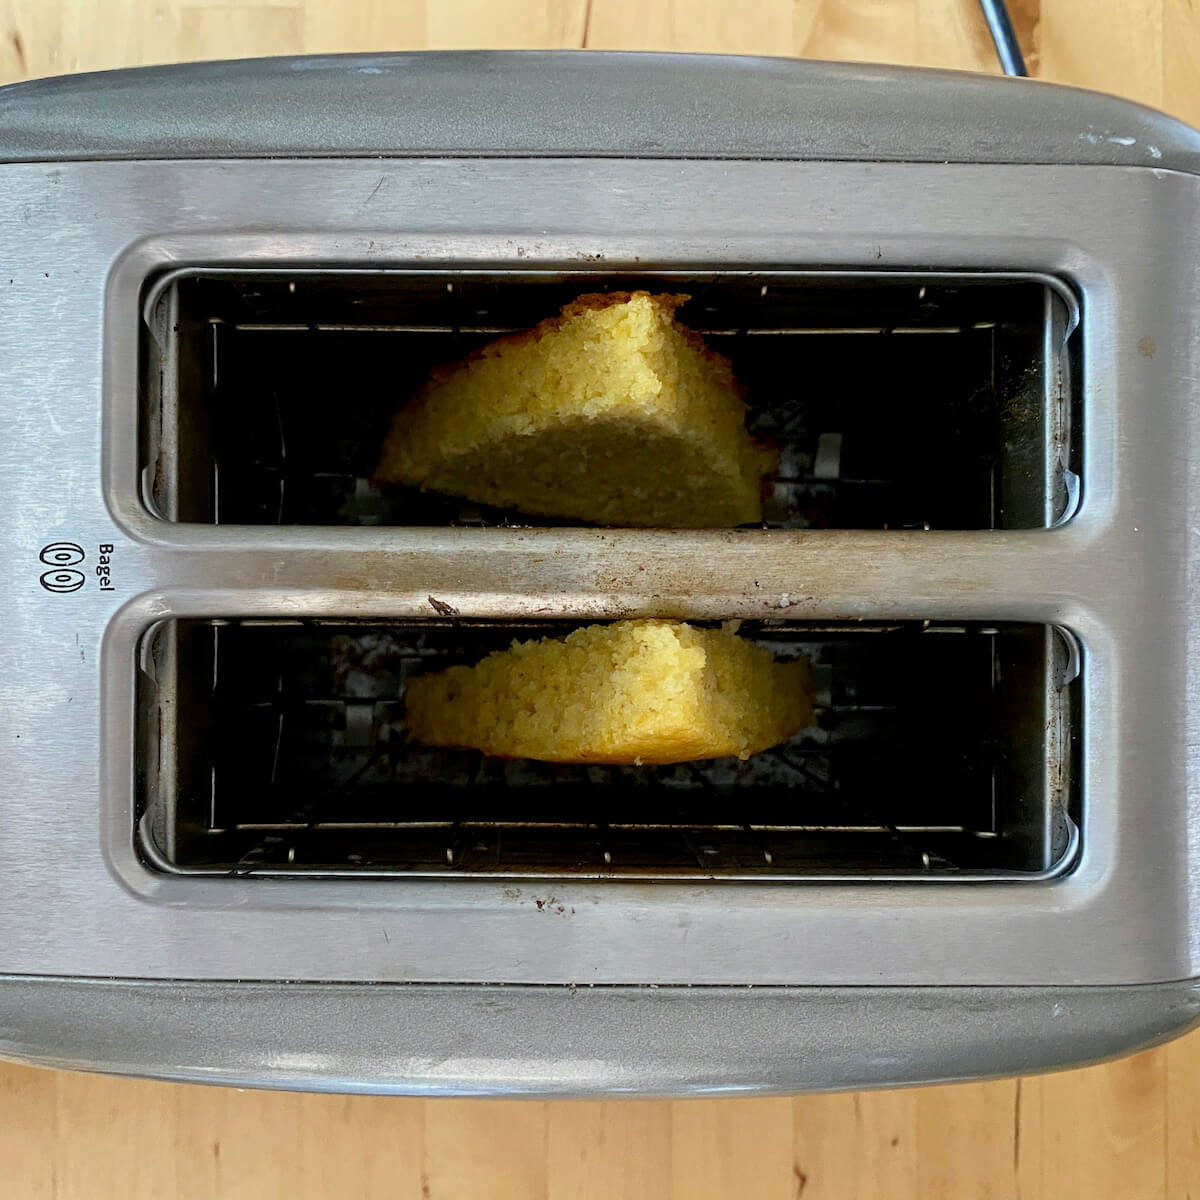 Two slices of cornbread in a toaster.